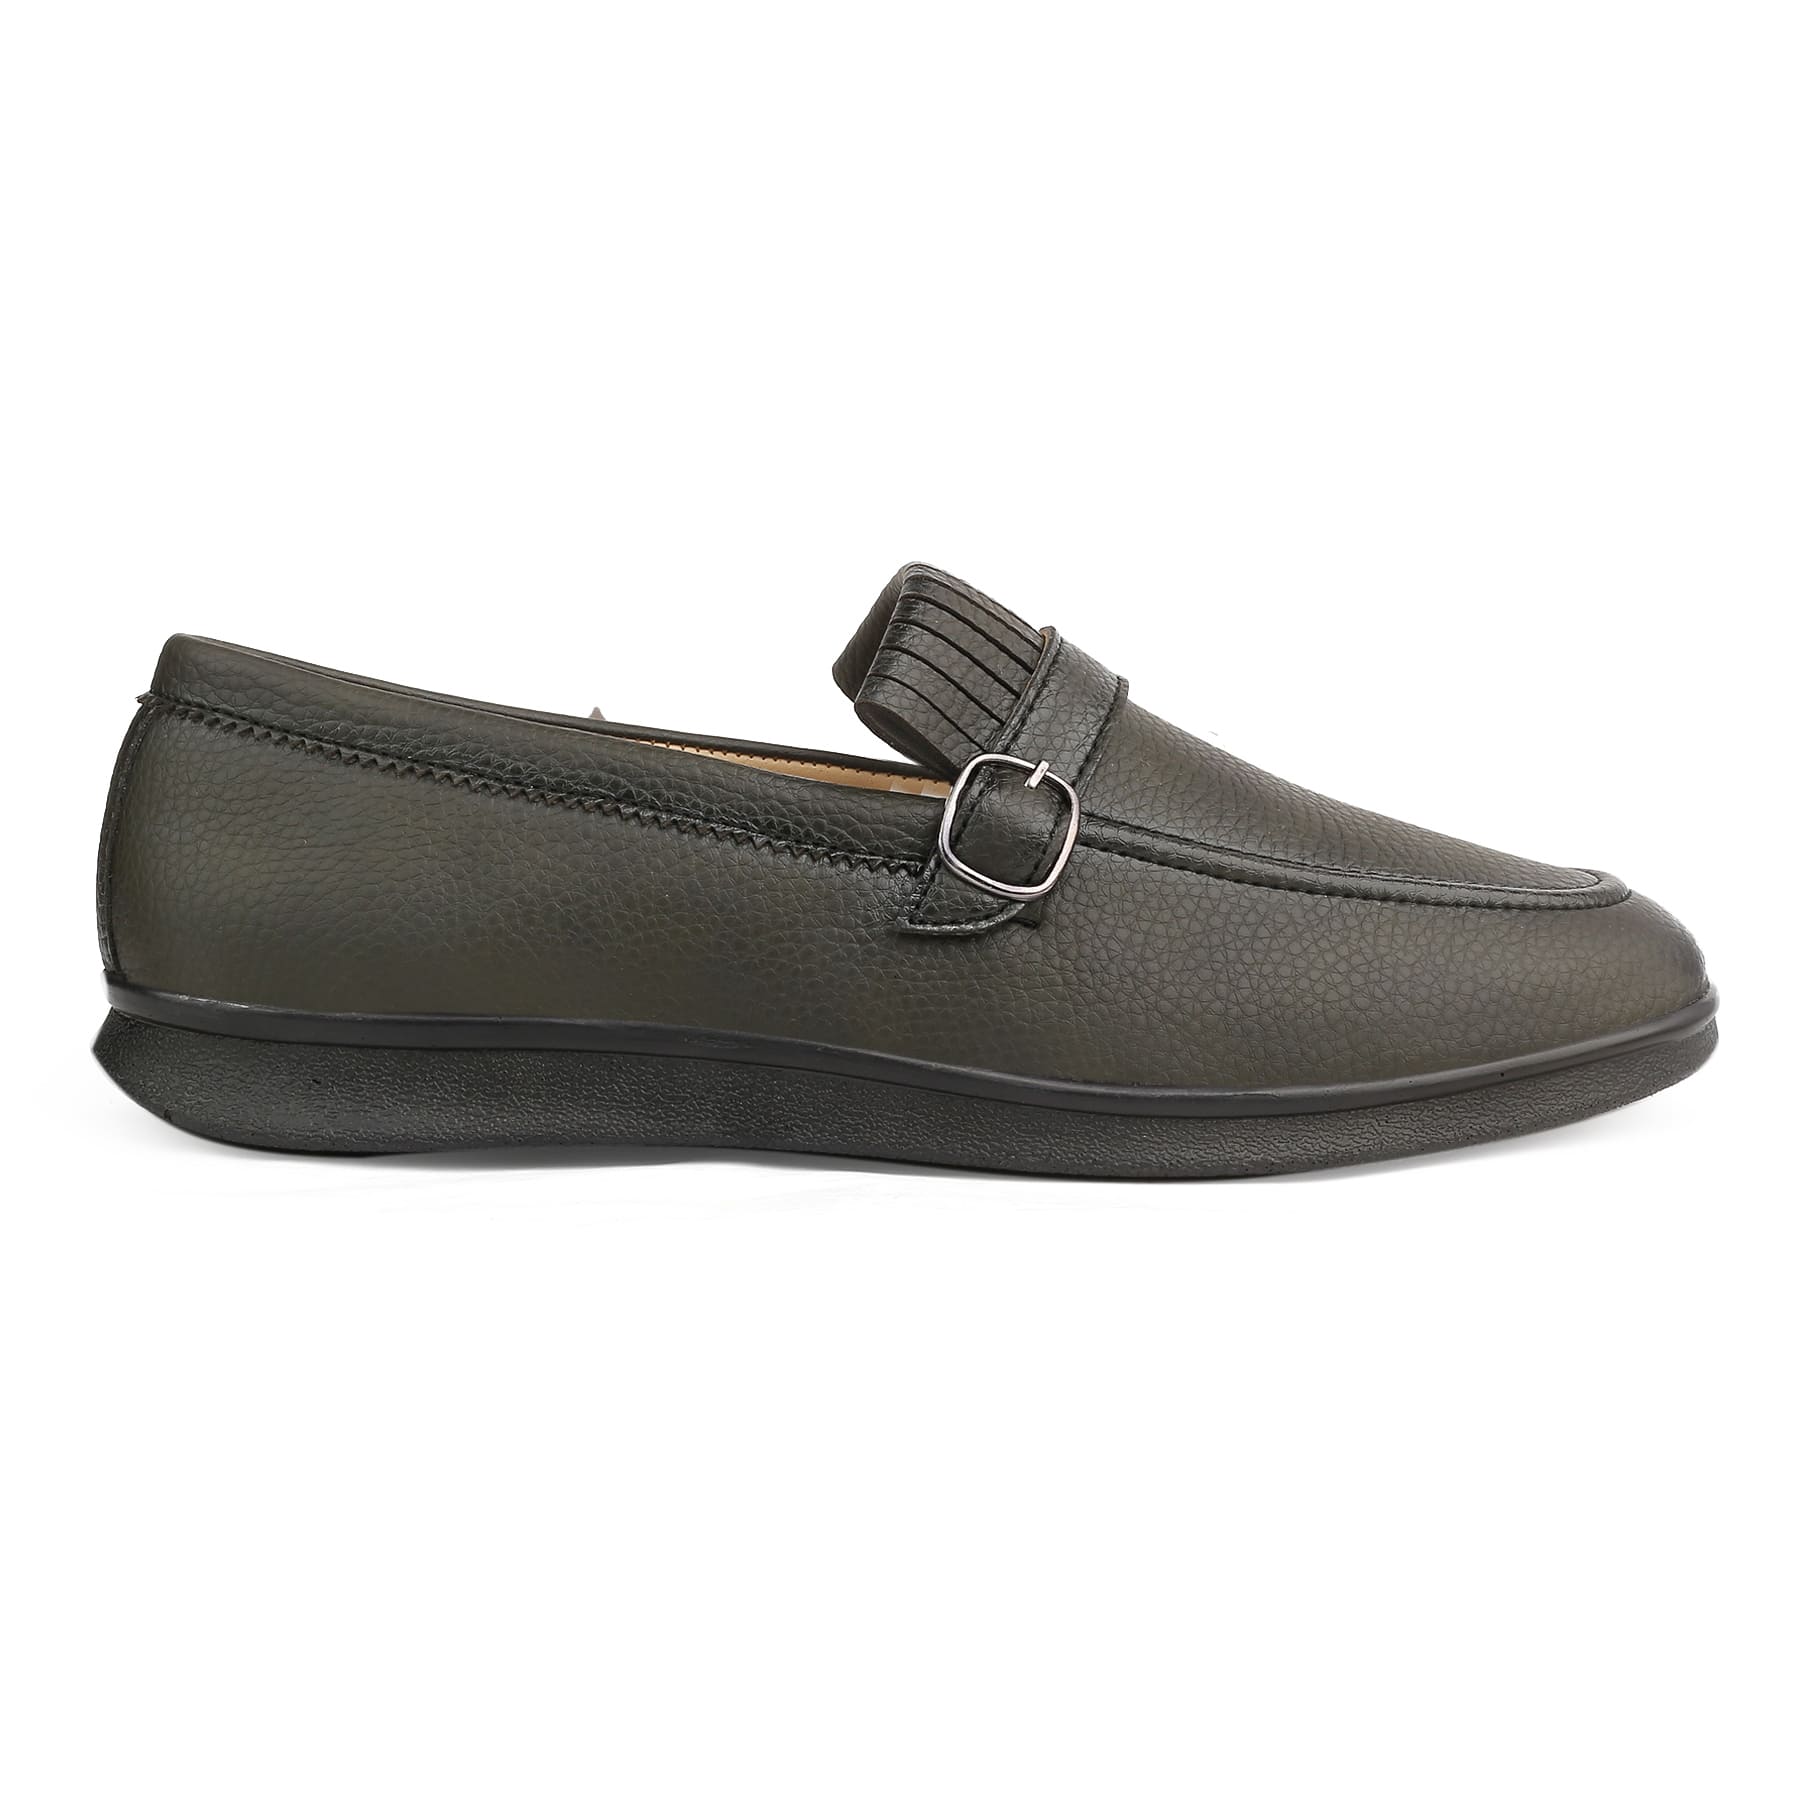 Bacca Bucci Men's ROME Dress Loafers Moccasins & Driving Shoes | Rubber Outsole | Light Weight